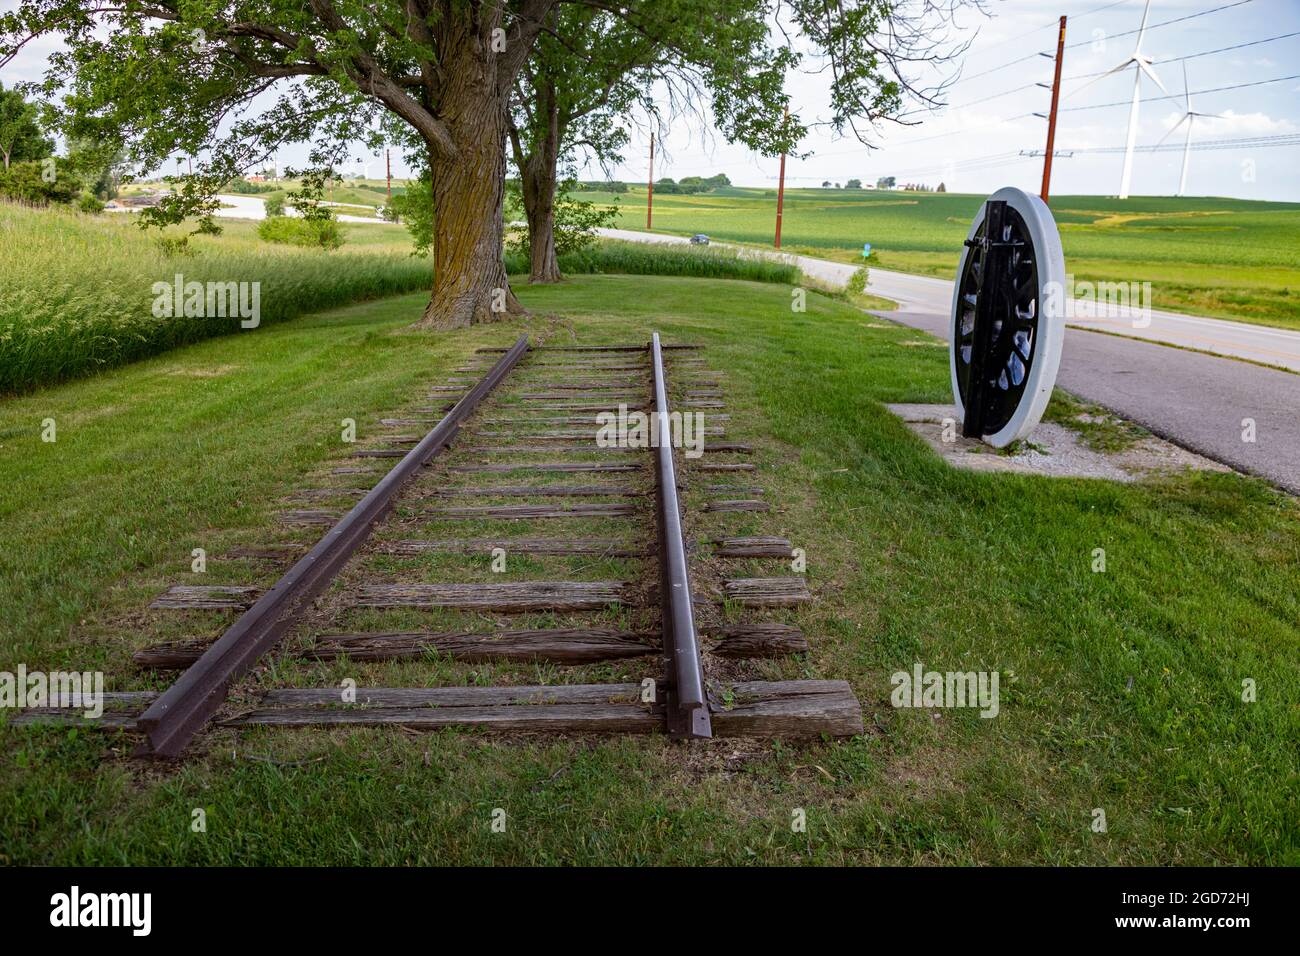 Adair, Iowa - The Jesse James Historical Site, the location of the first train robbery in the West, commited by the Jesse James Gang on July 21, 1873. Stock Photo